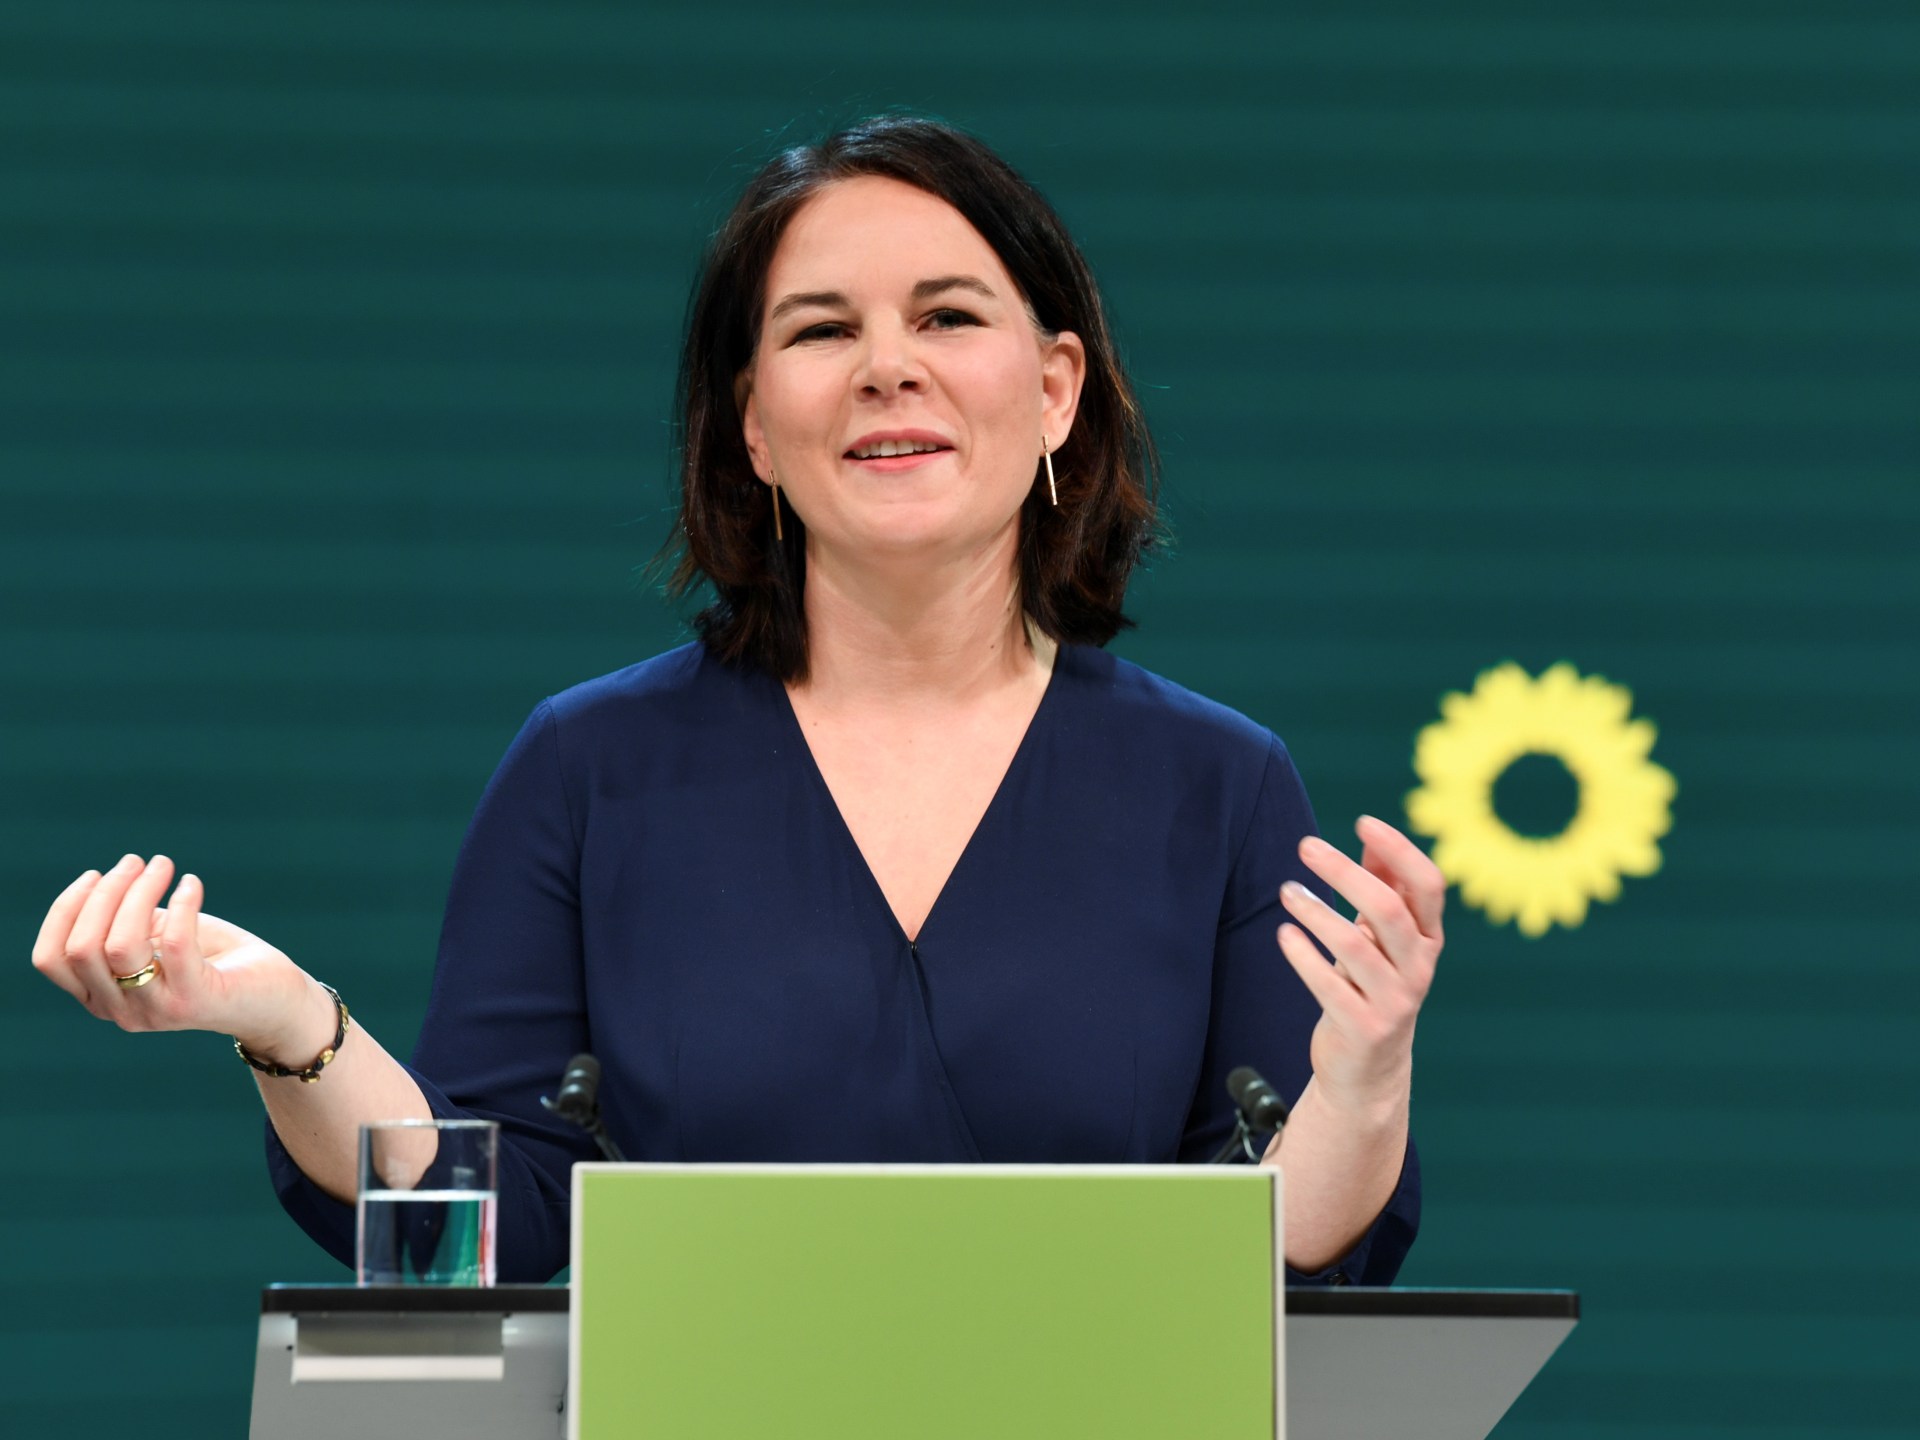 Could a Green Party chancellor lead Germany?